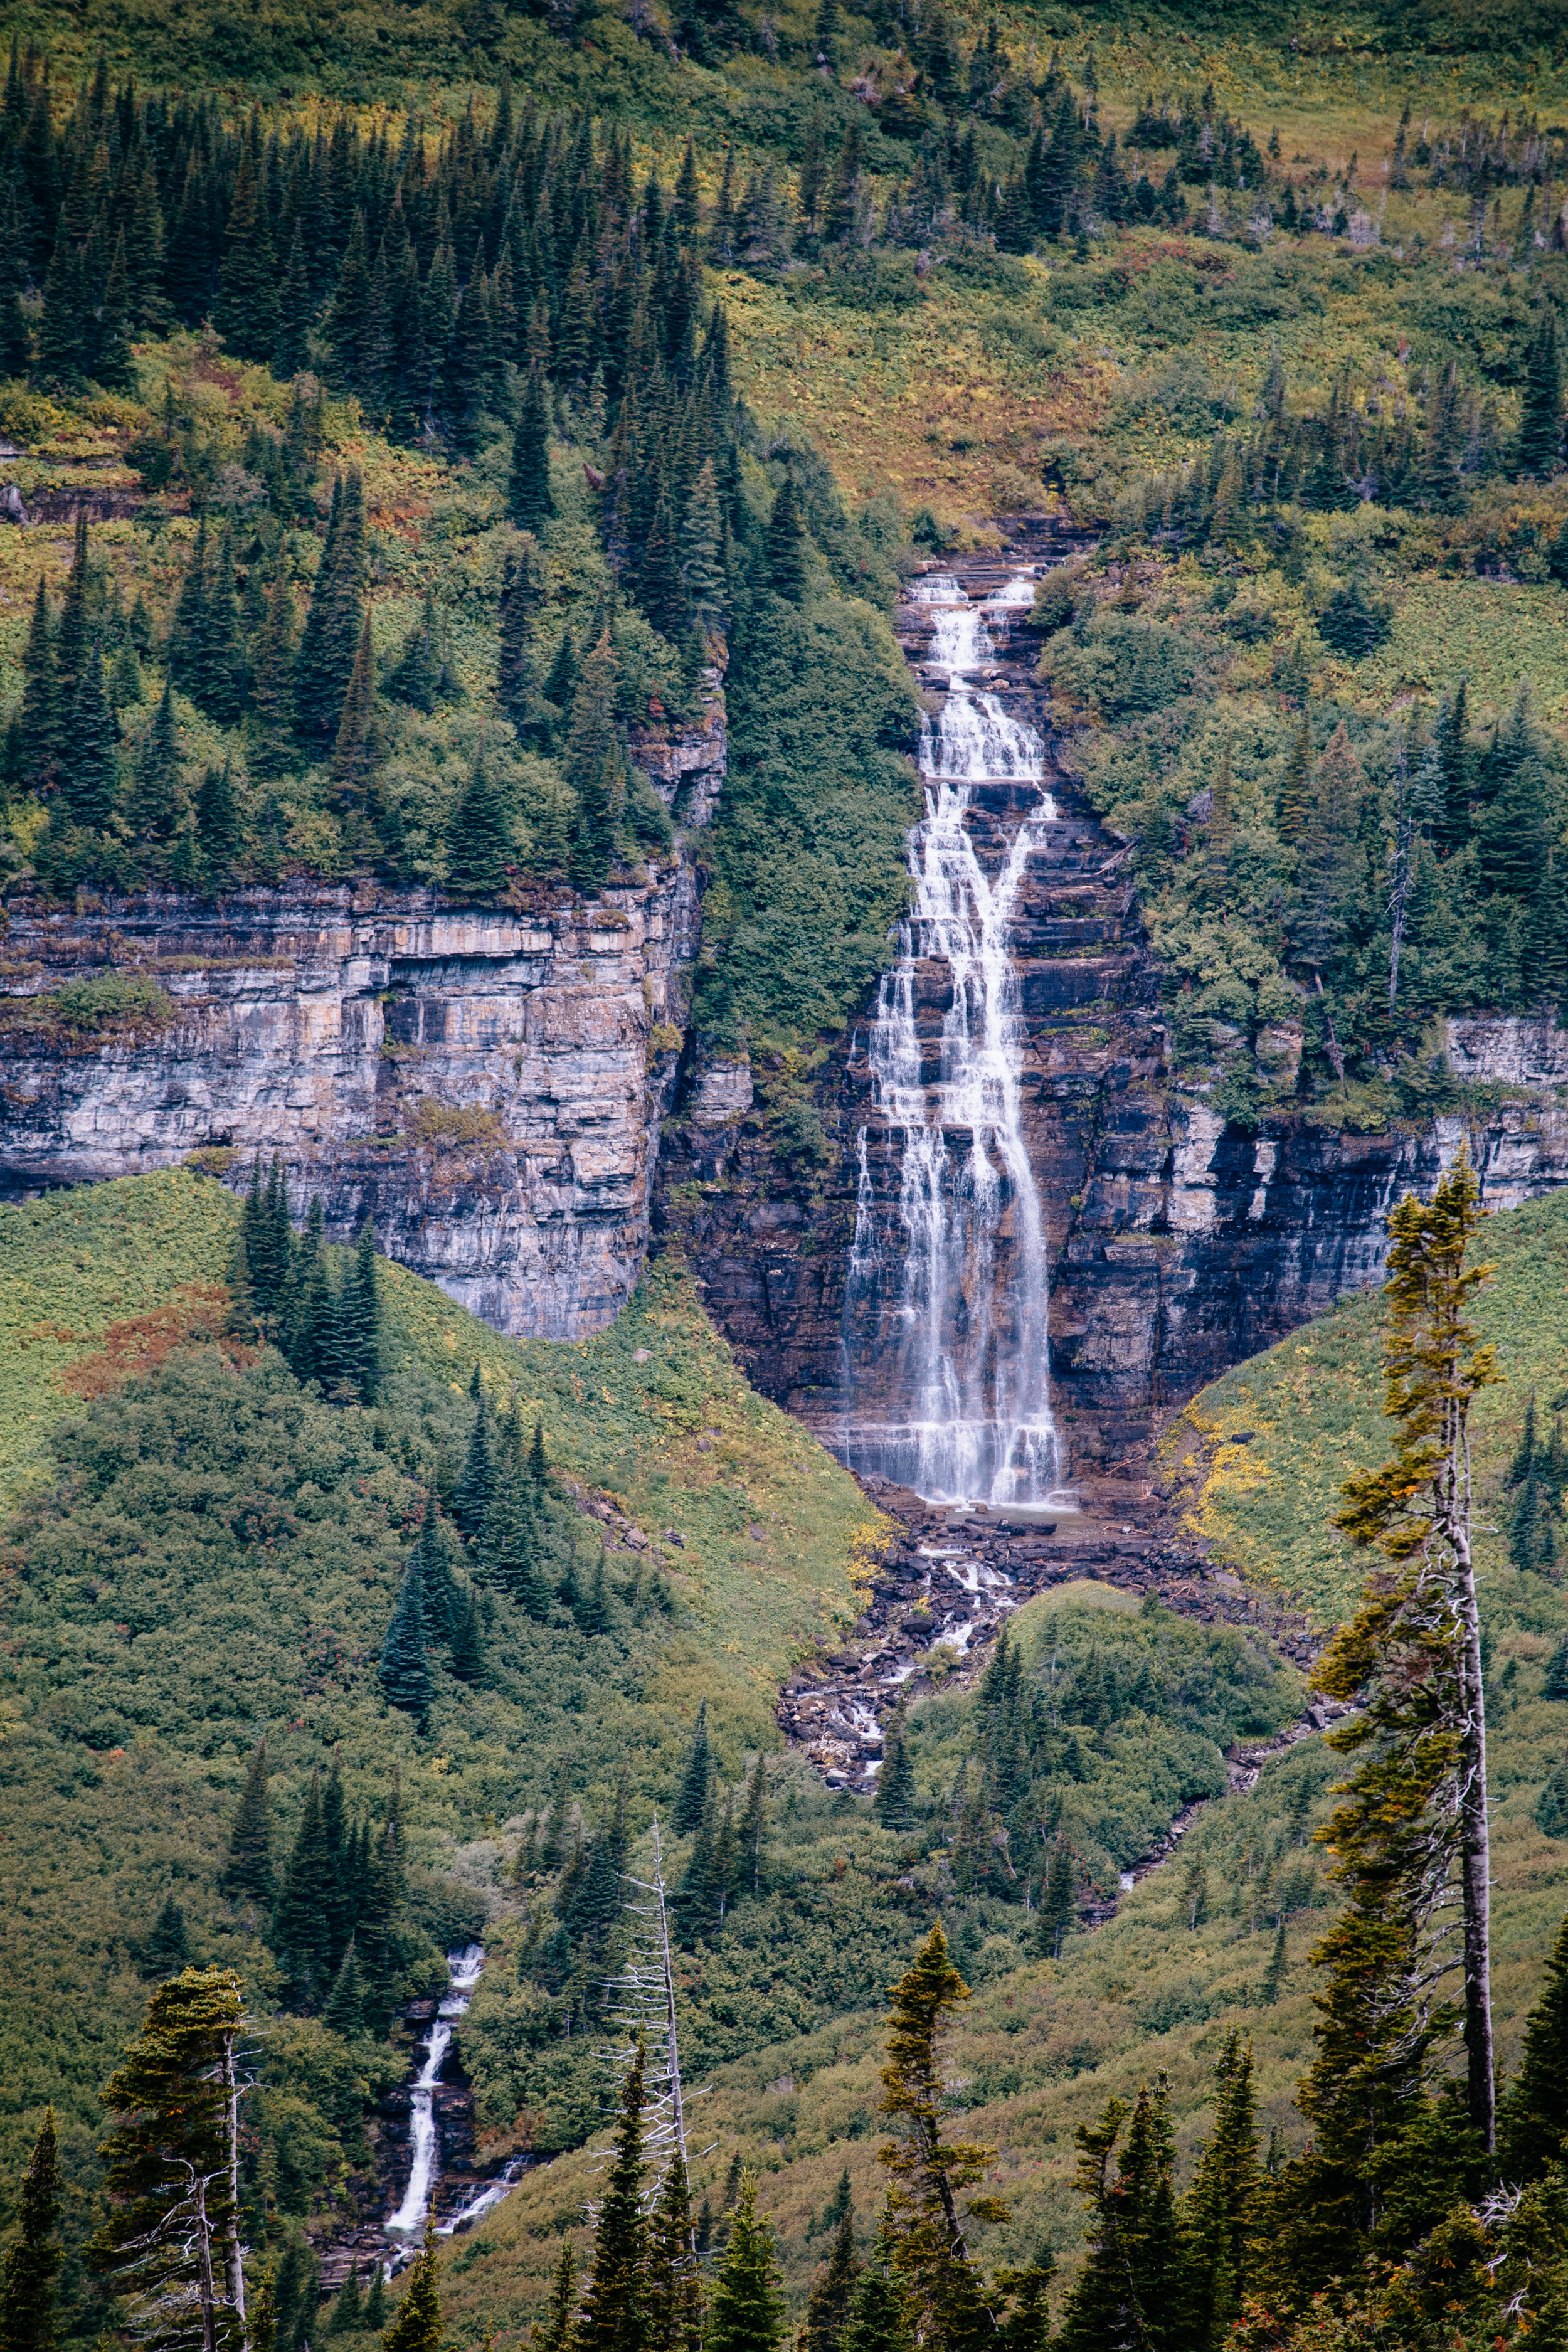  One of the many waterfalls along Going-to-the-Sun Road 